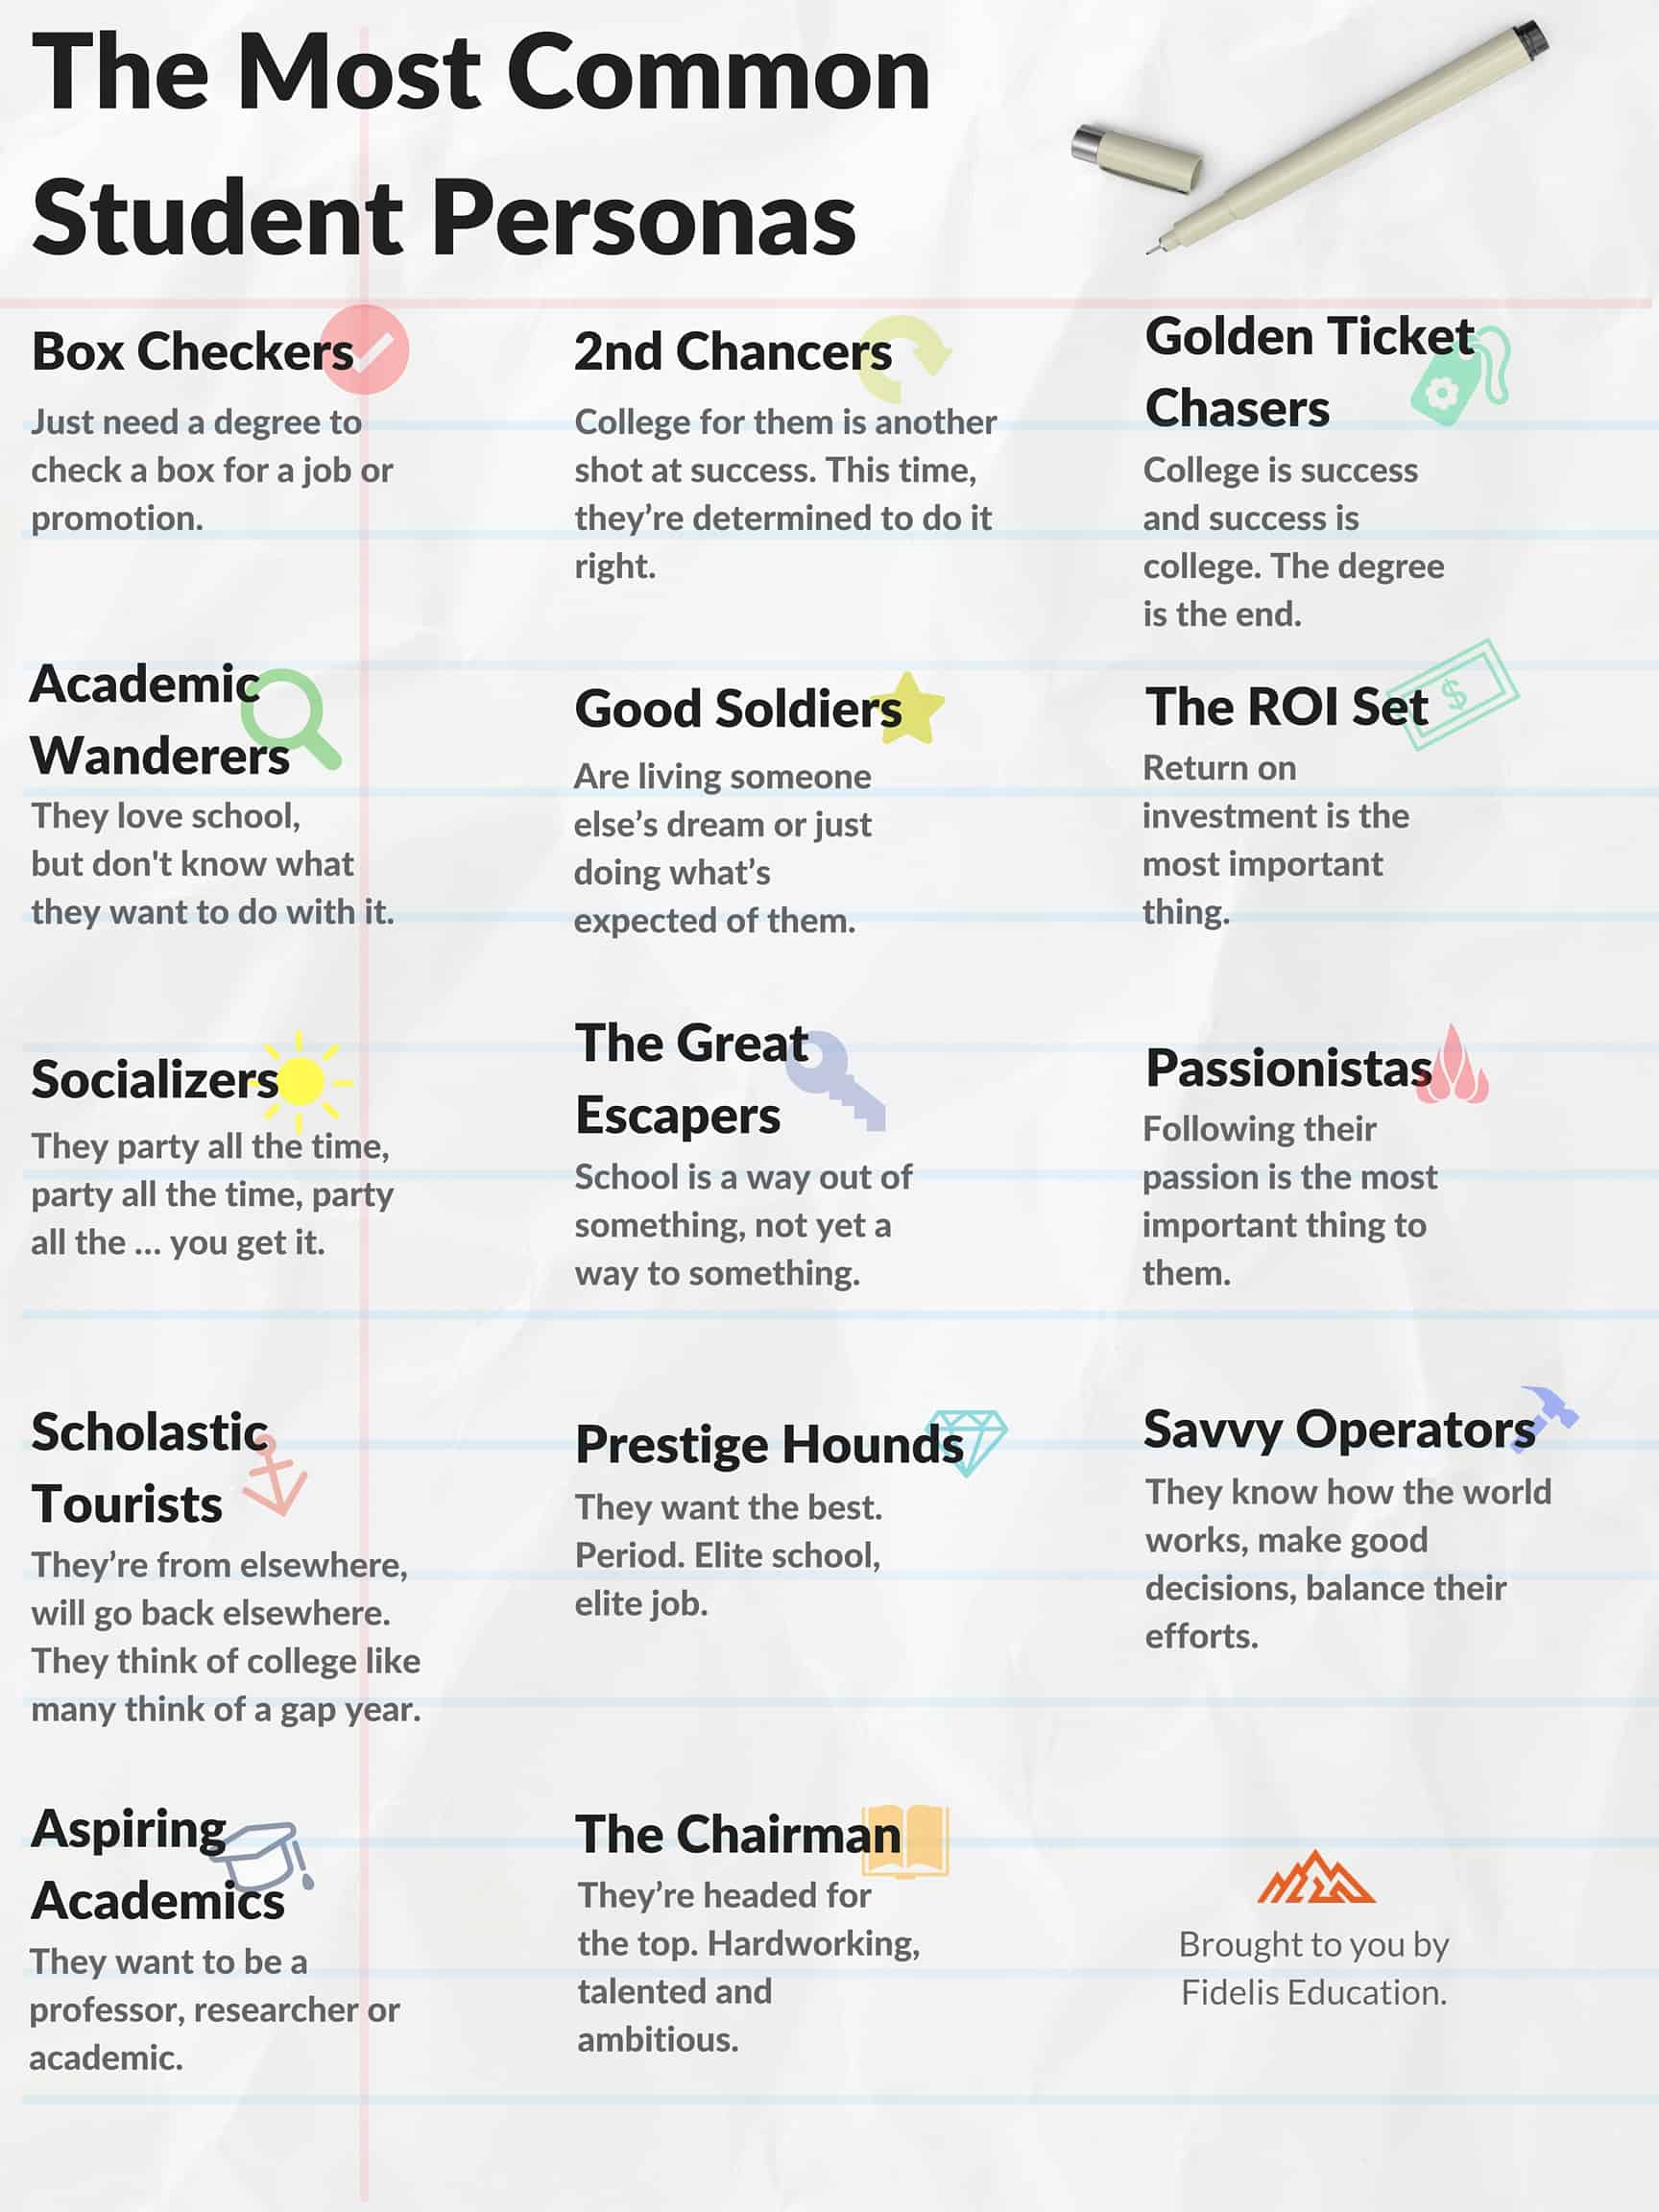 The Most Common Student Personas